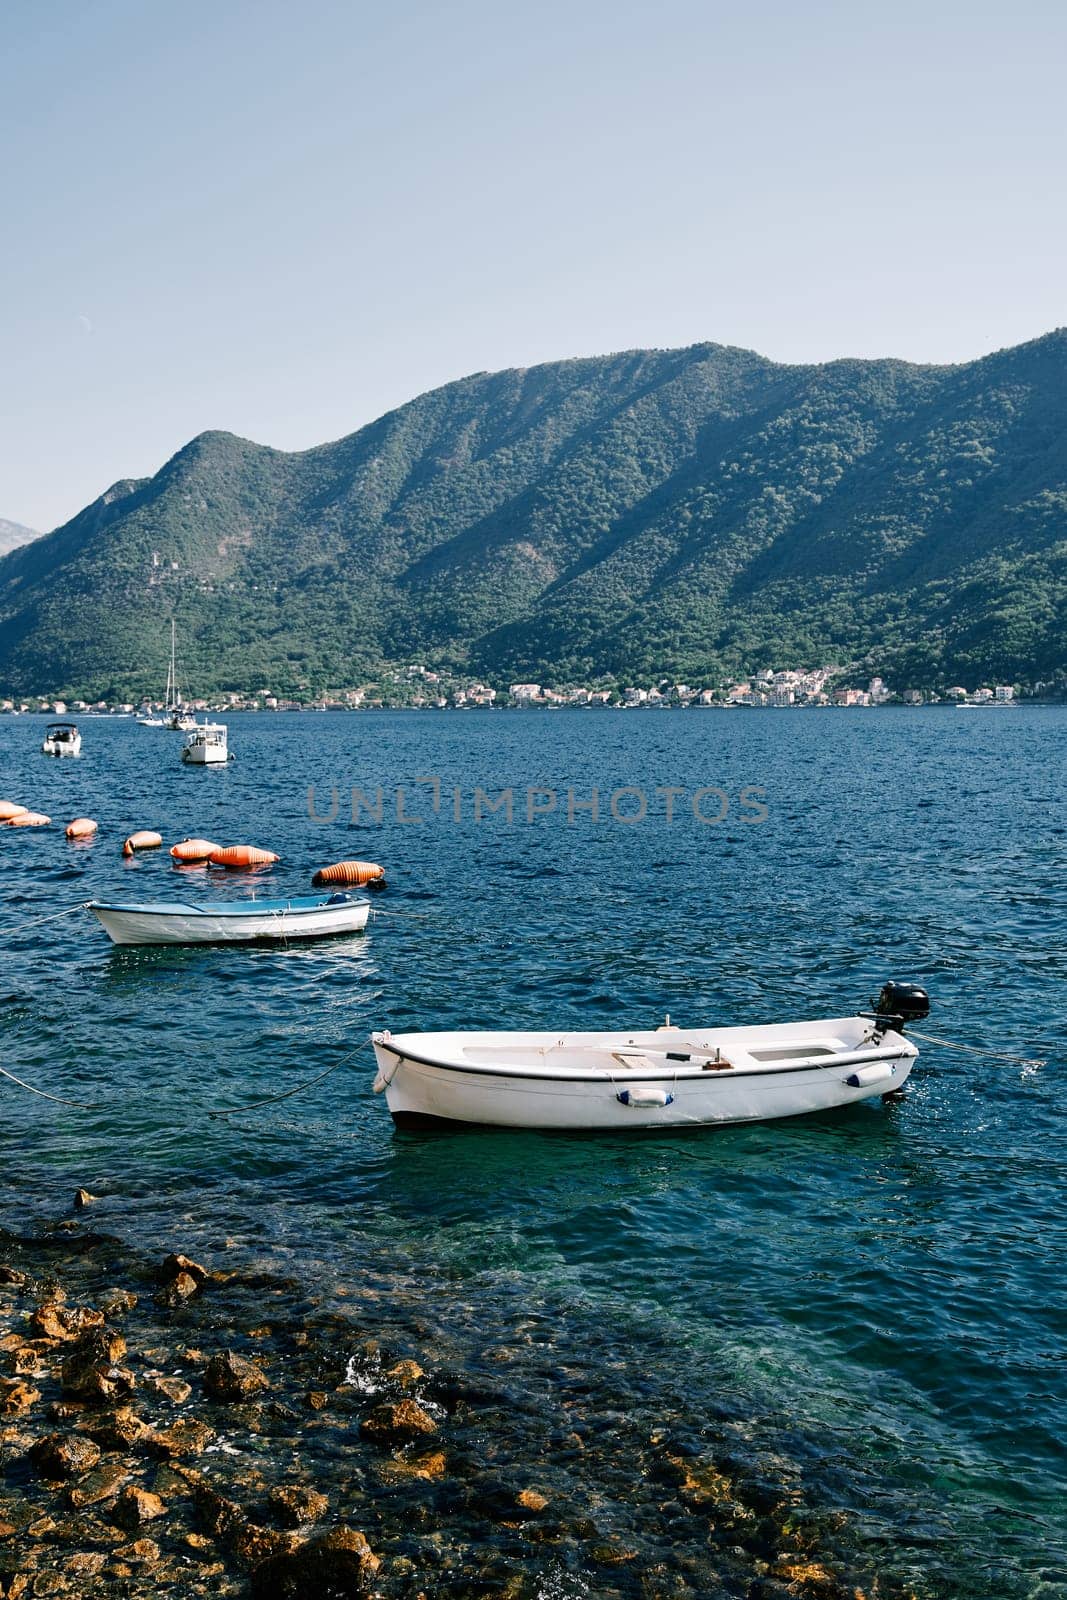 Small motor boats sway on the waves moored near the shore by Nadtochiy